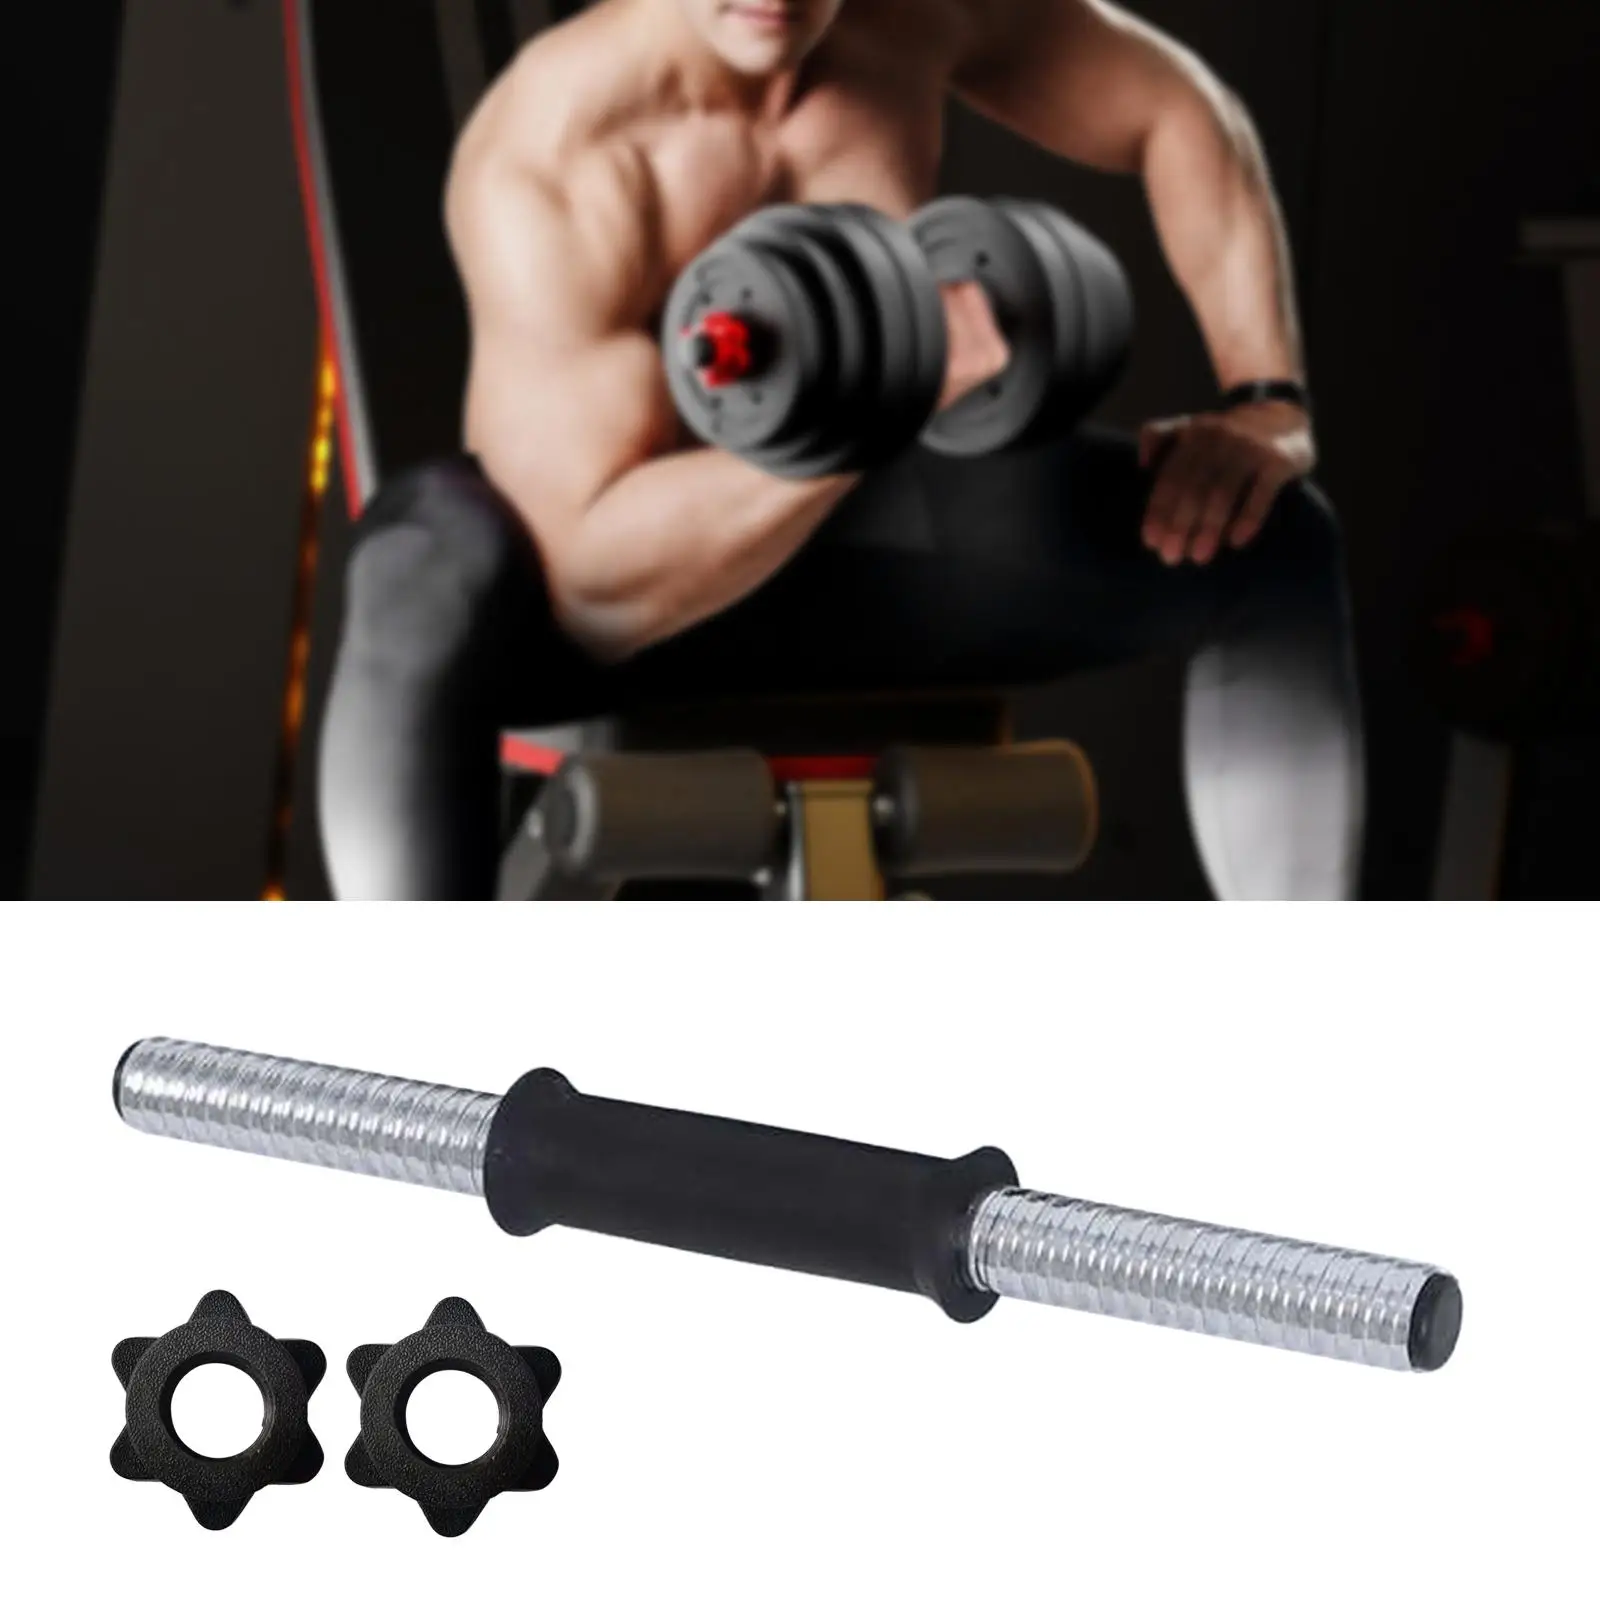 Dumbbell Bar Fitness Equipment Practical Comfort Grip Multifunctional Home Gym for Training Weightlifting Workout Barbells Sport